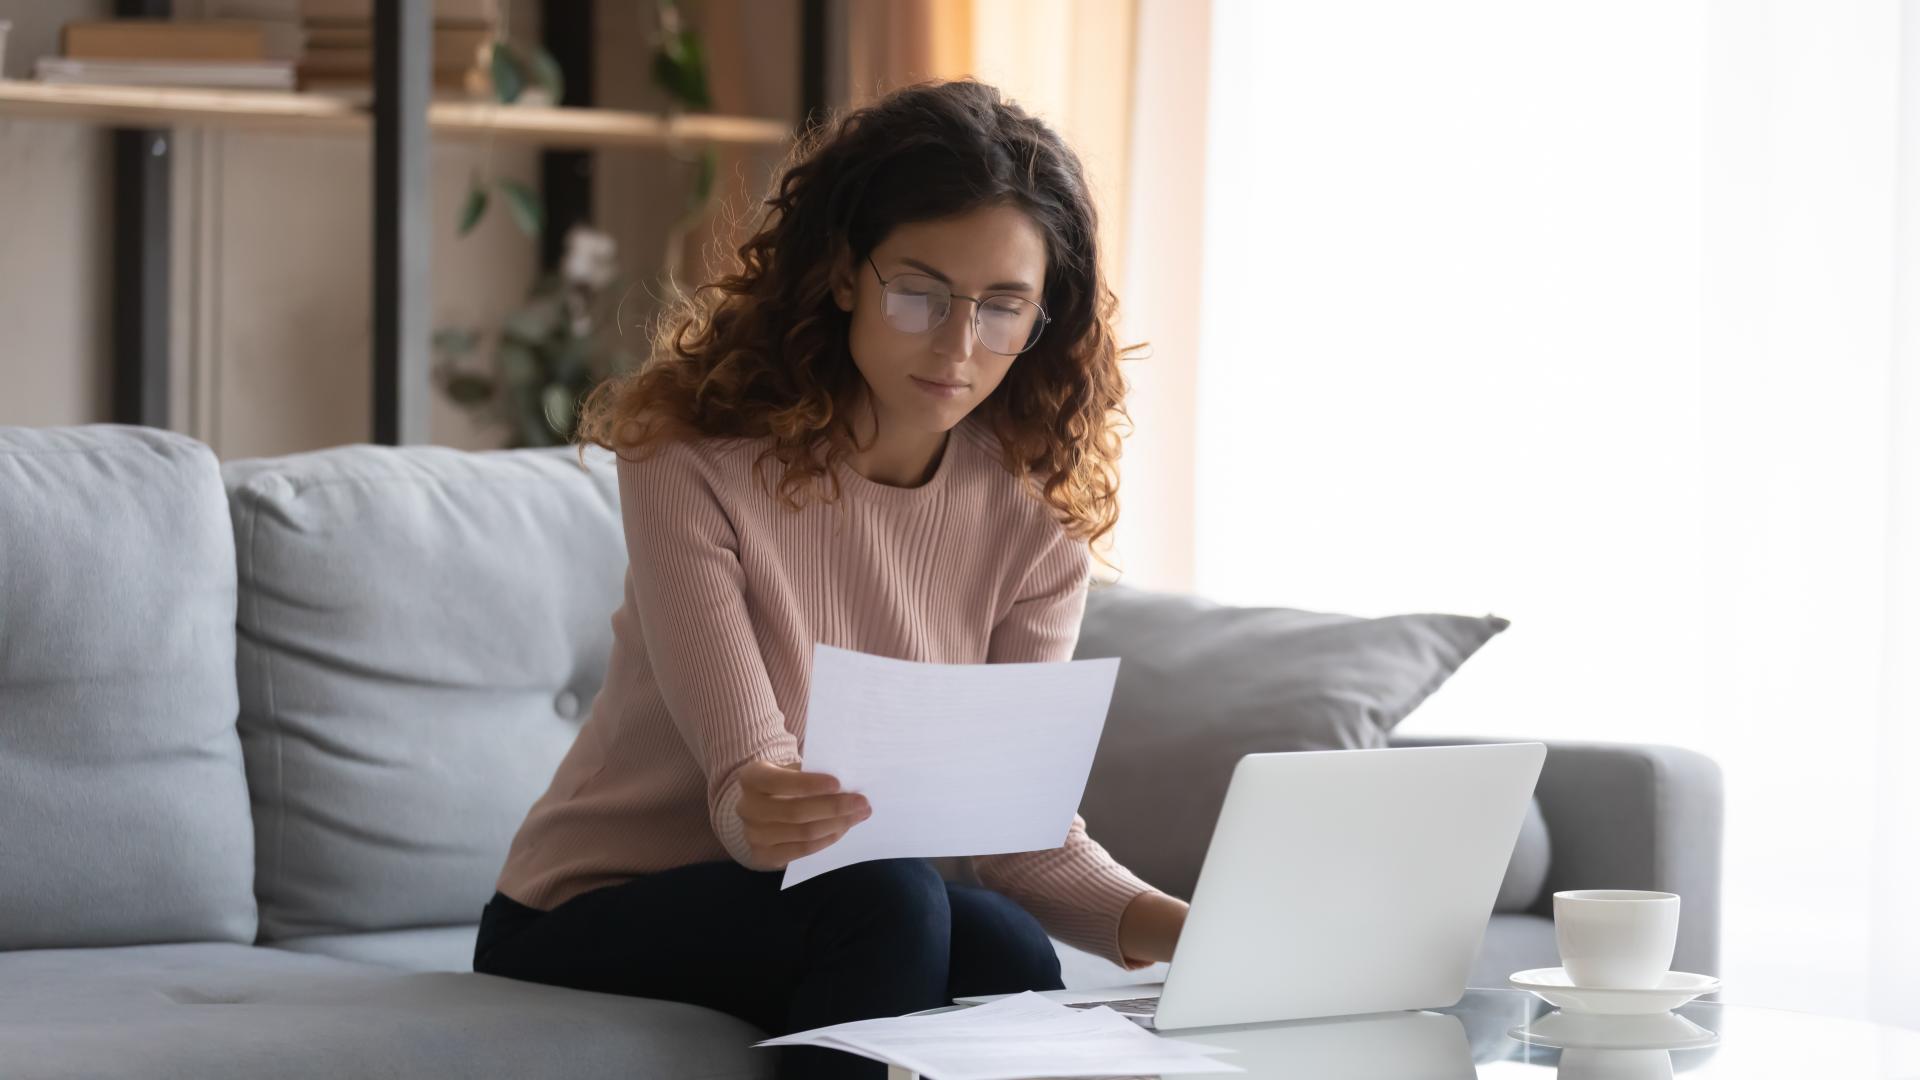 Woman sitting on couch in front of laptop computer holding paper